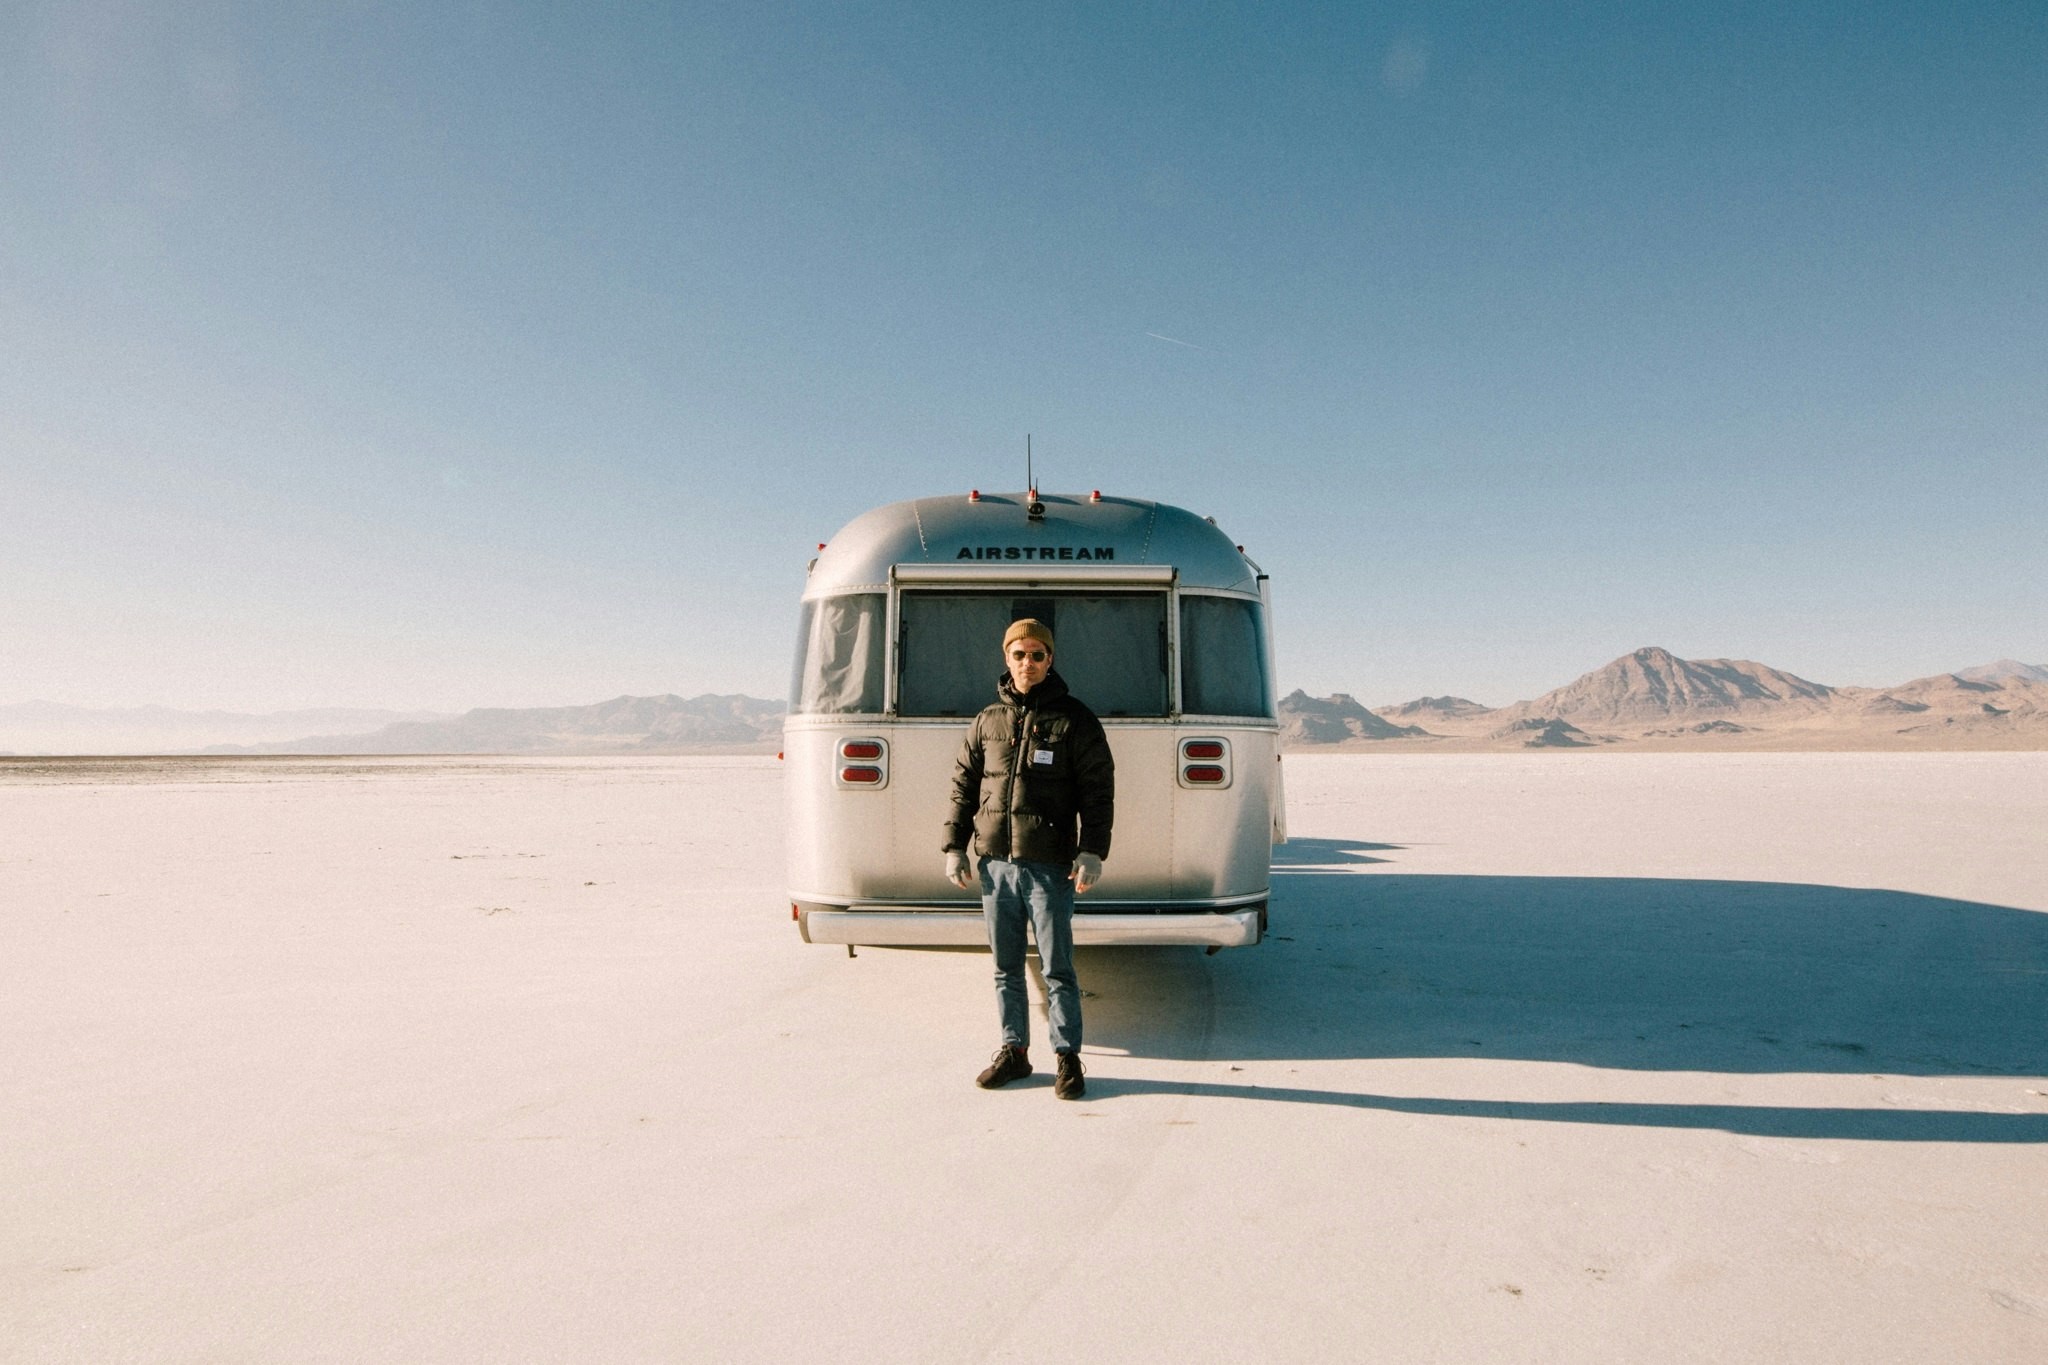 Hugh Acheson with an Airstream in the Salt Flats of Utah